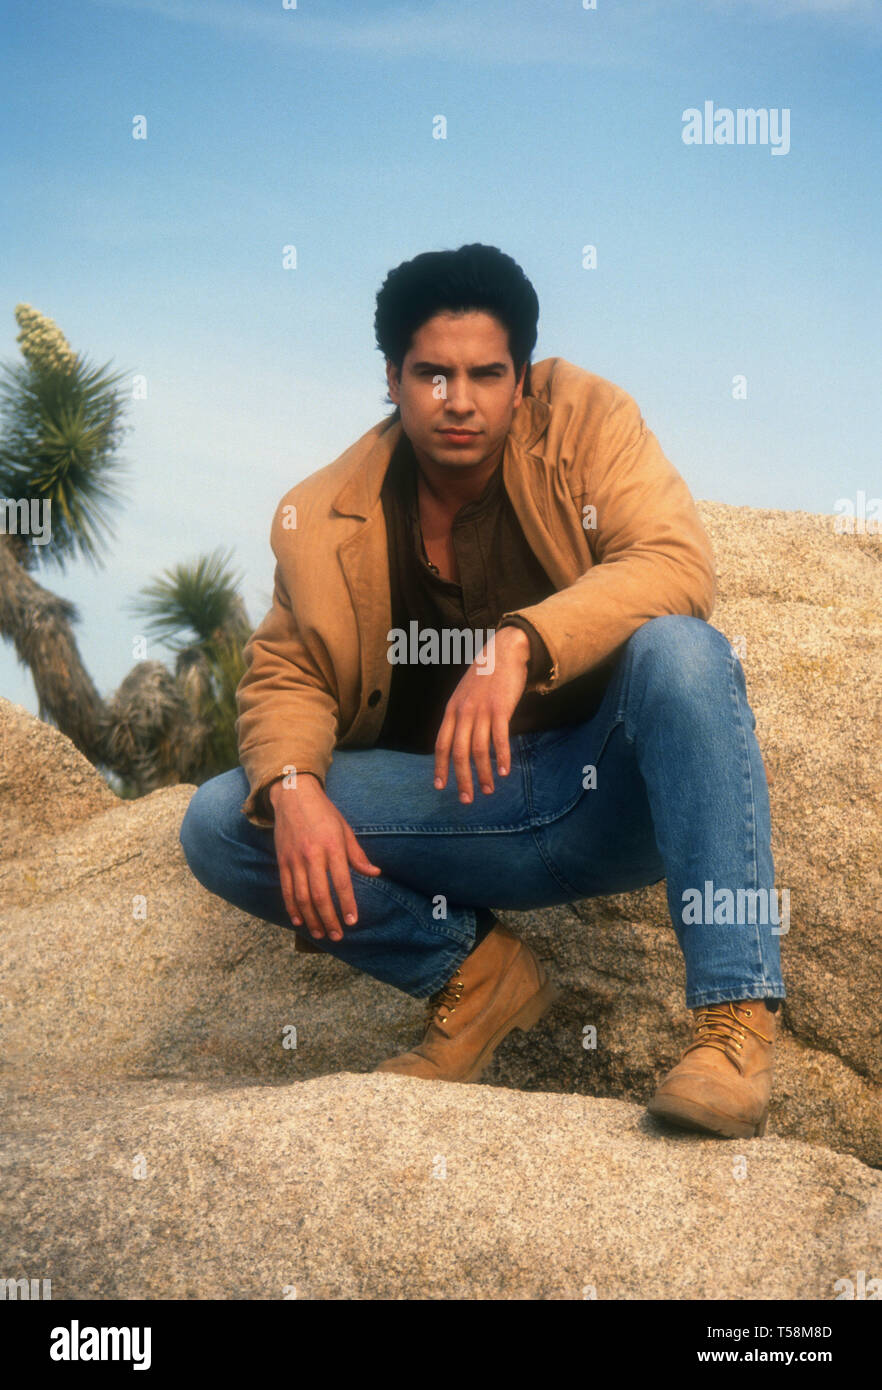 Los Angeles, California, USA 6th April 1994 (Exclusive )  Actor Marco Sanchez poses at a photo shoot on April 6, 1994 in Los Angeles, California, USA. Photo by Barry King/Alamy Stock Photo Stock Photo